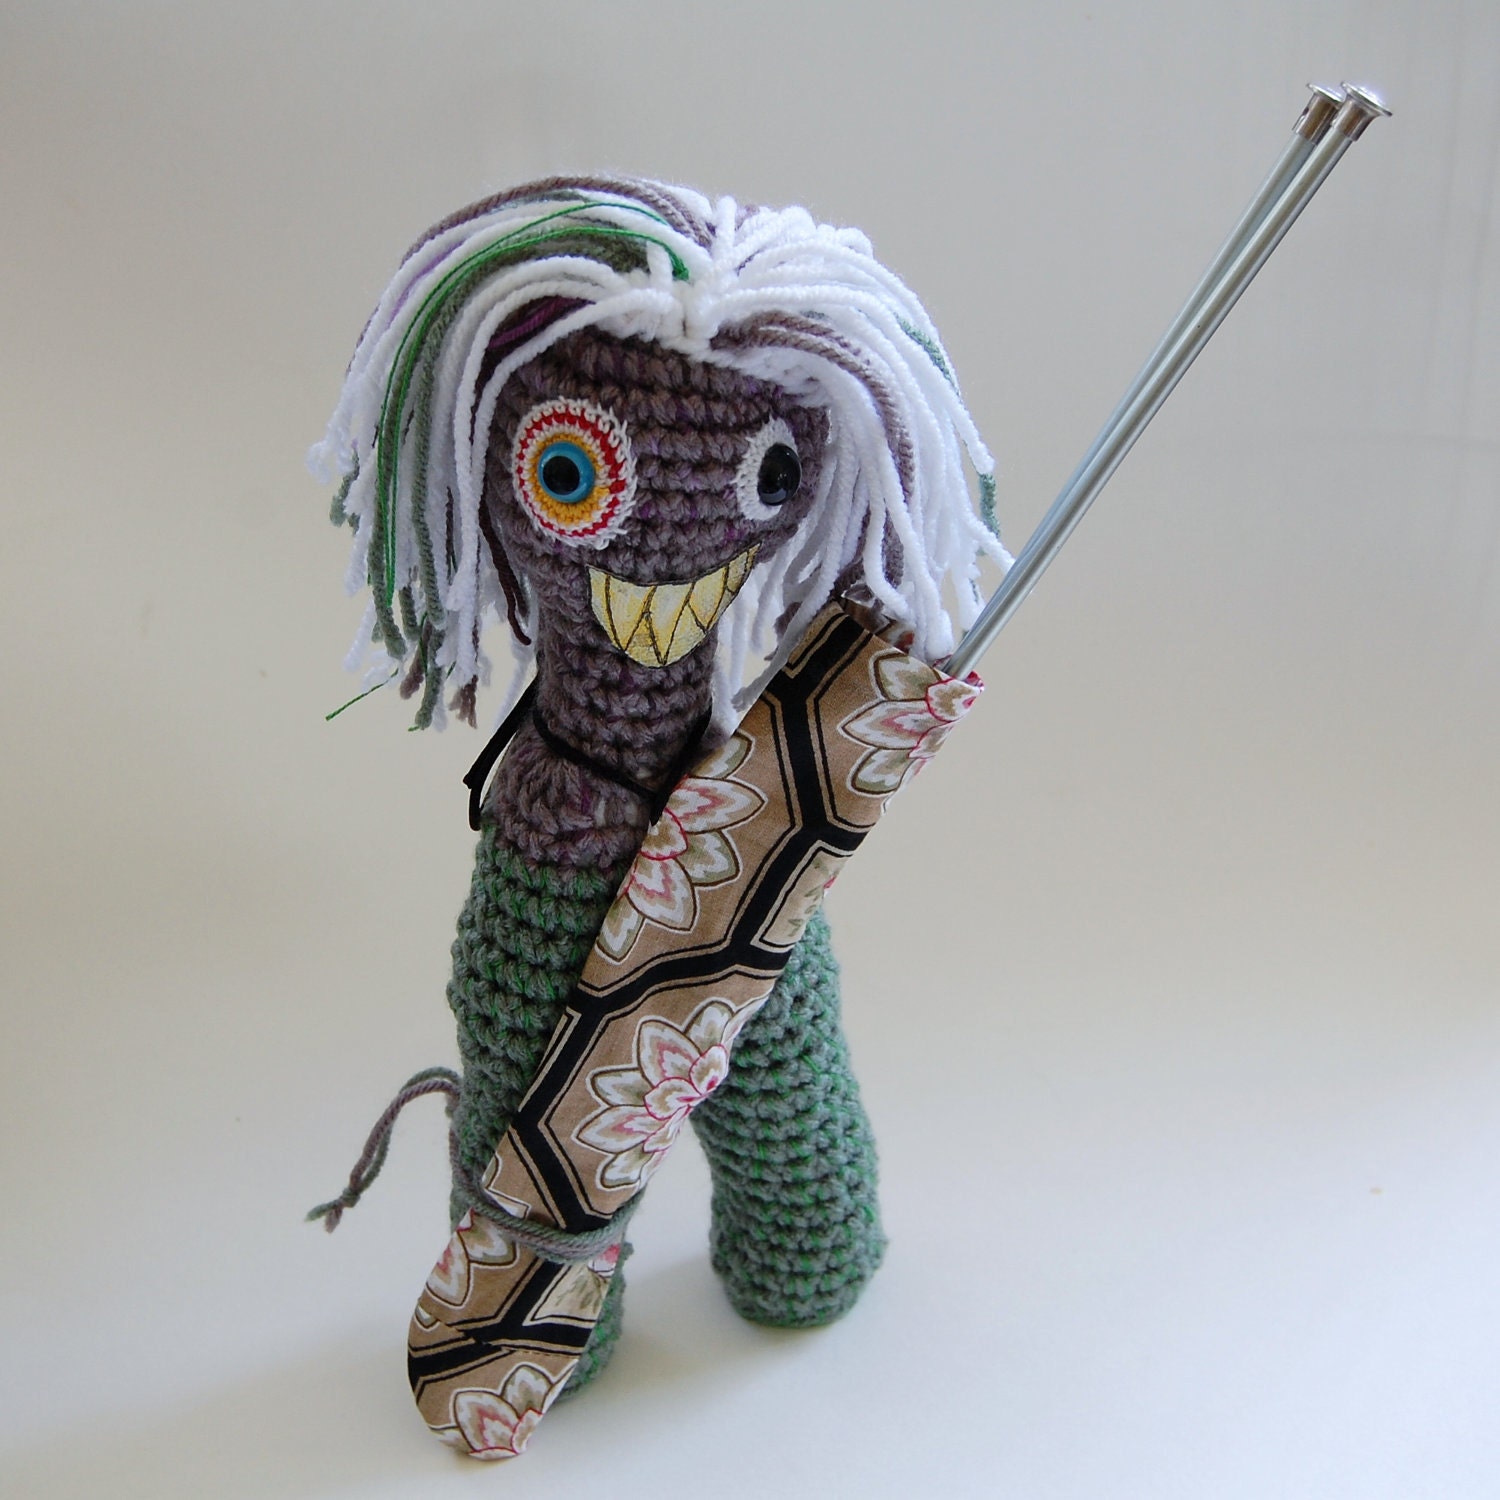 SALE Lady Fab Monsters - OOAK Crocheted Project Knitting Needle and Crochet Hook Holder - knotbygranma